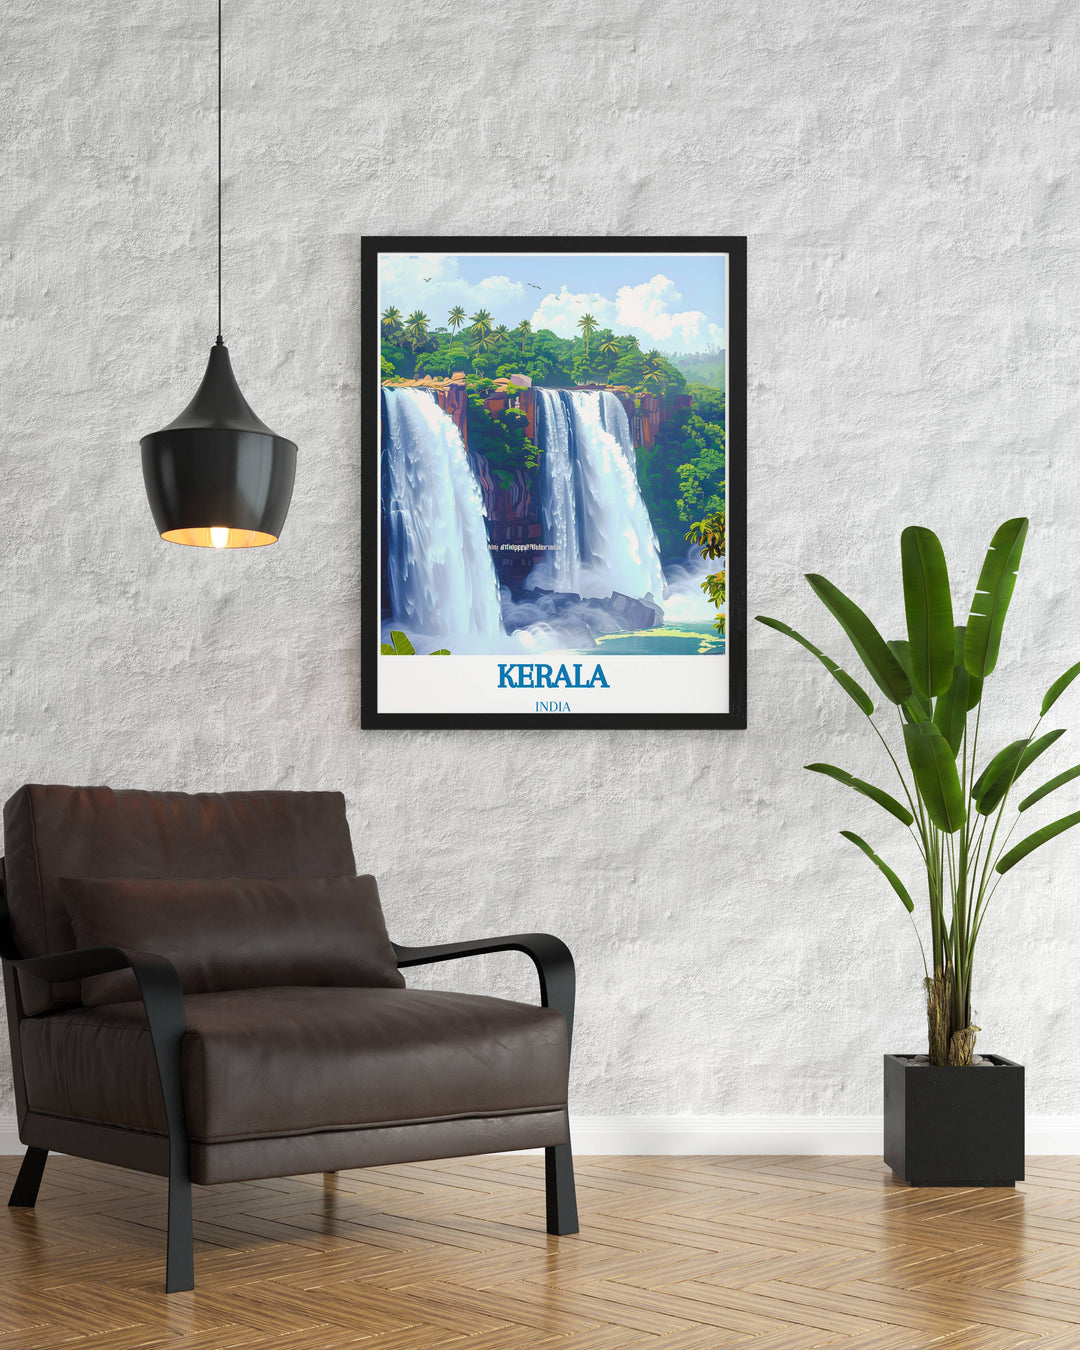 Artistic portrayal of Athirappilly Waterfalls in a framed print, emphasizing the lush surroundings and vibrant water hues.